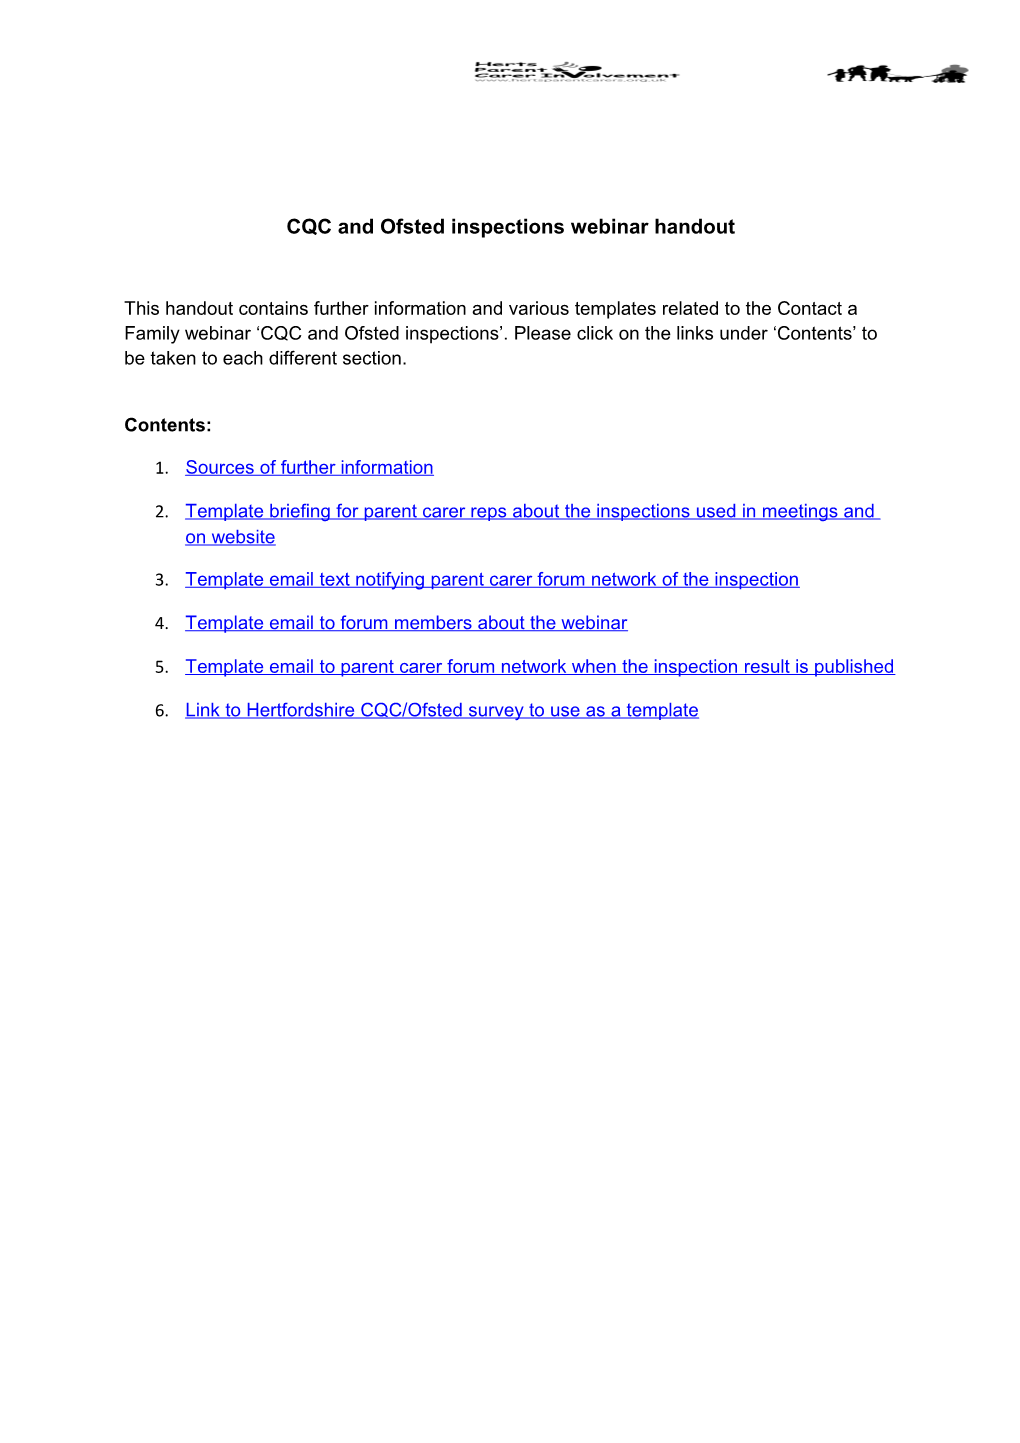 CQC and Ofsted Inspections Webinar Handout